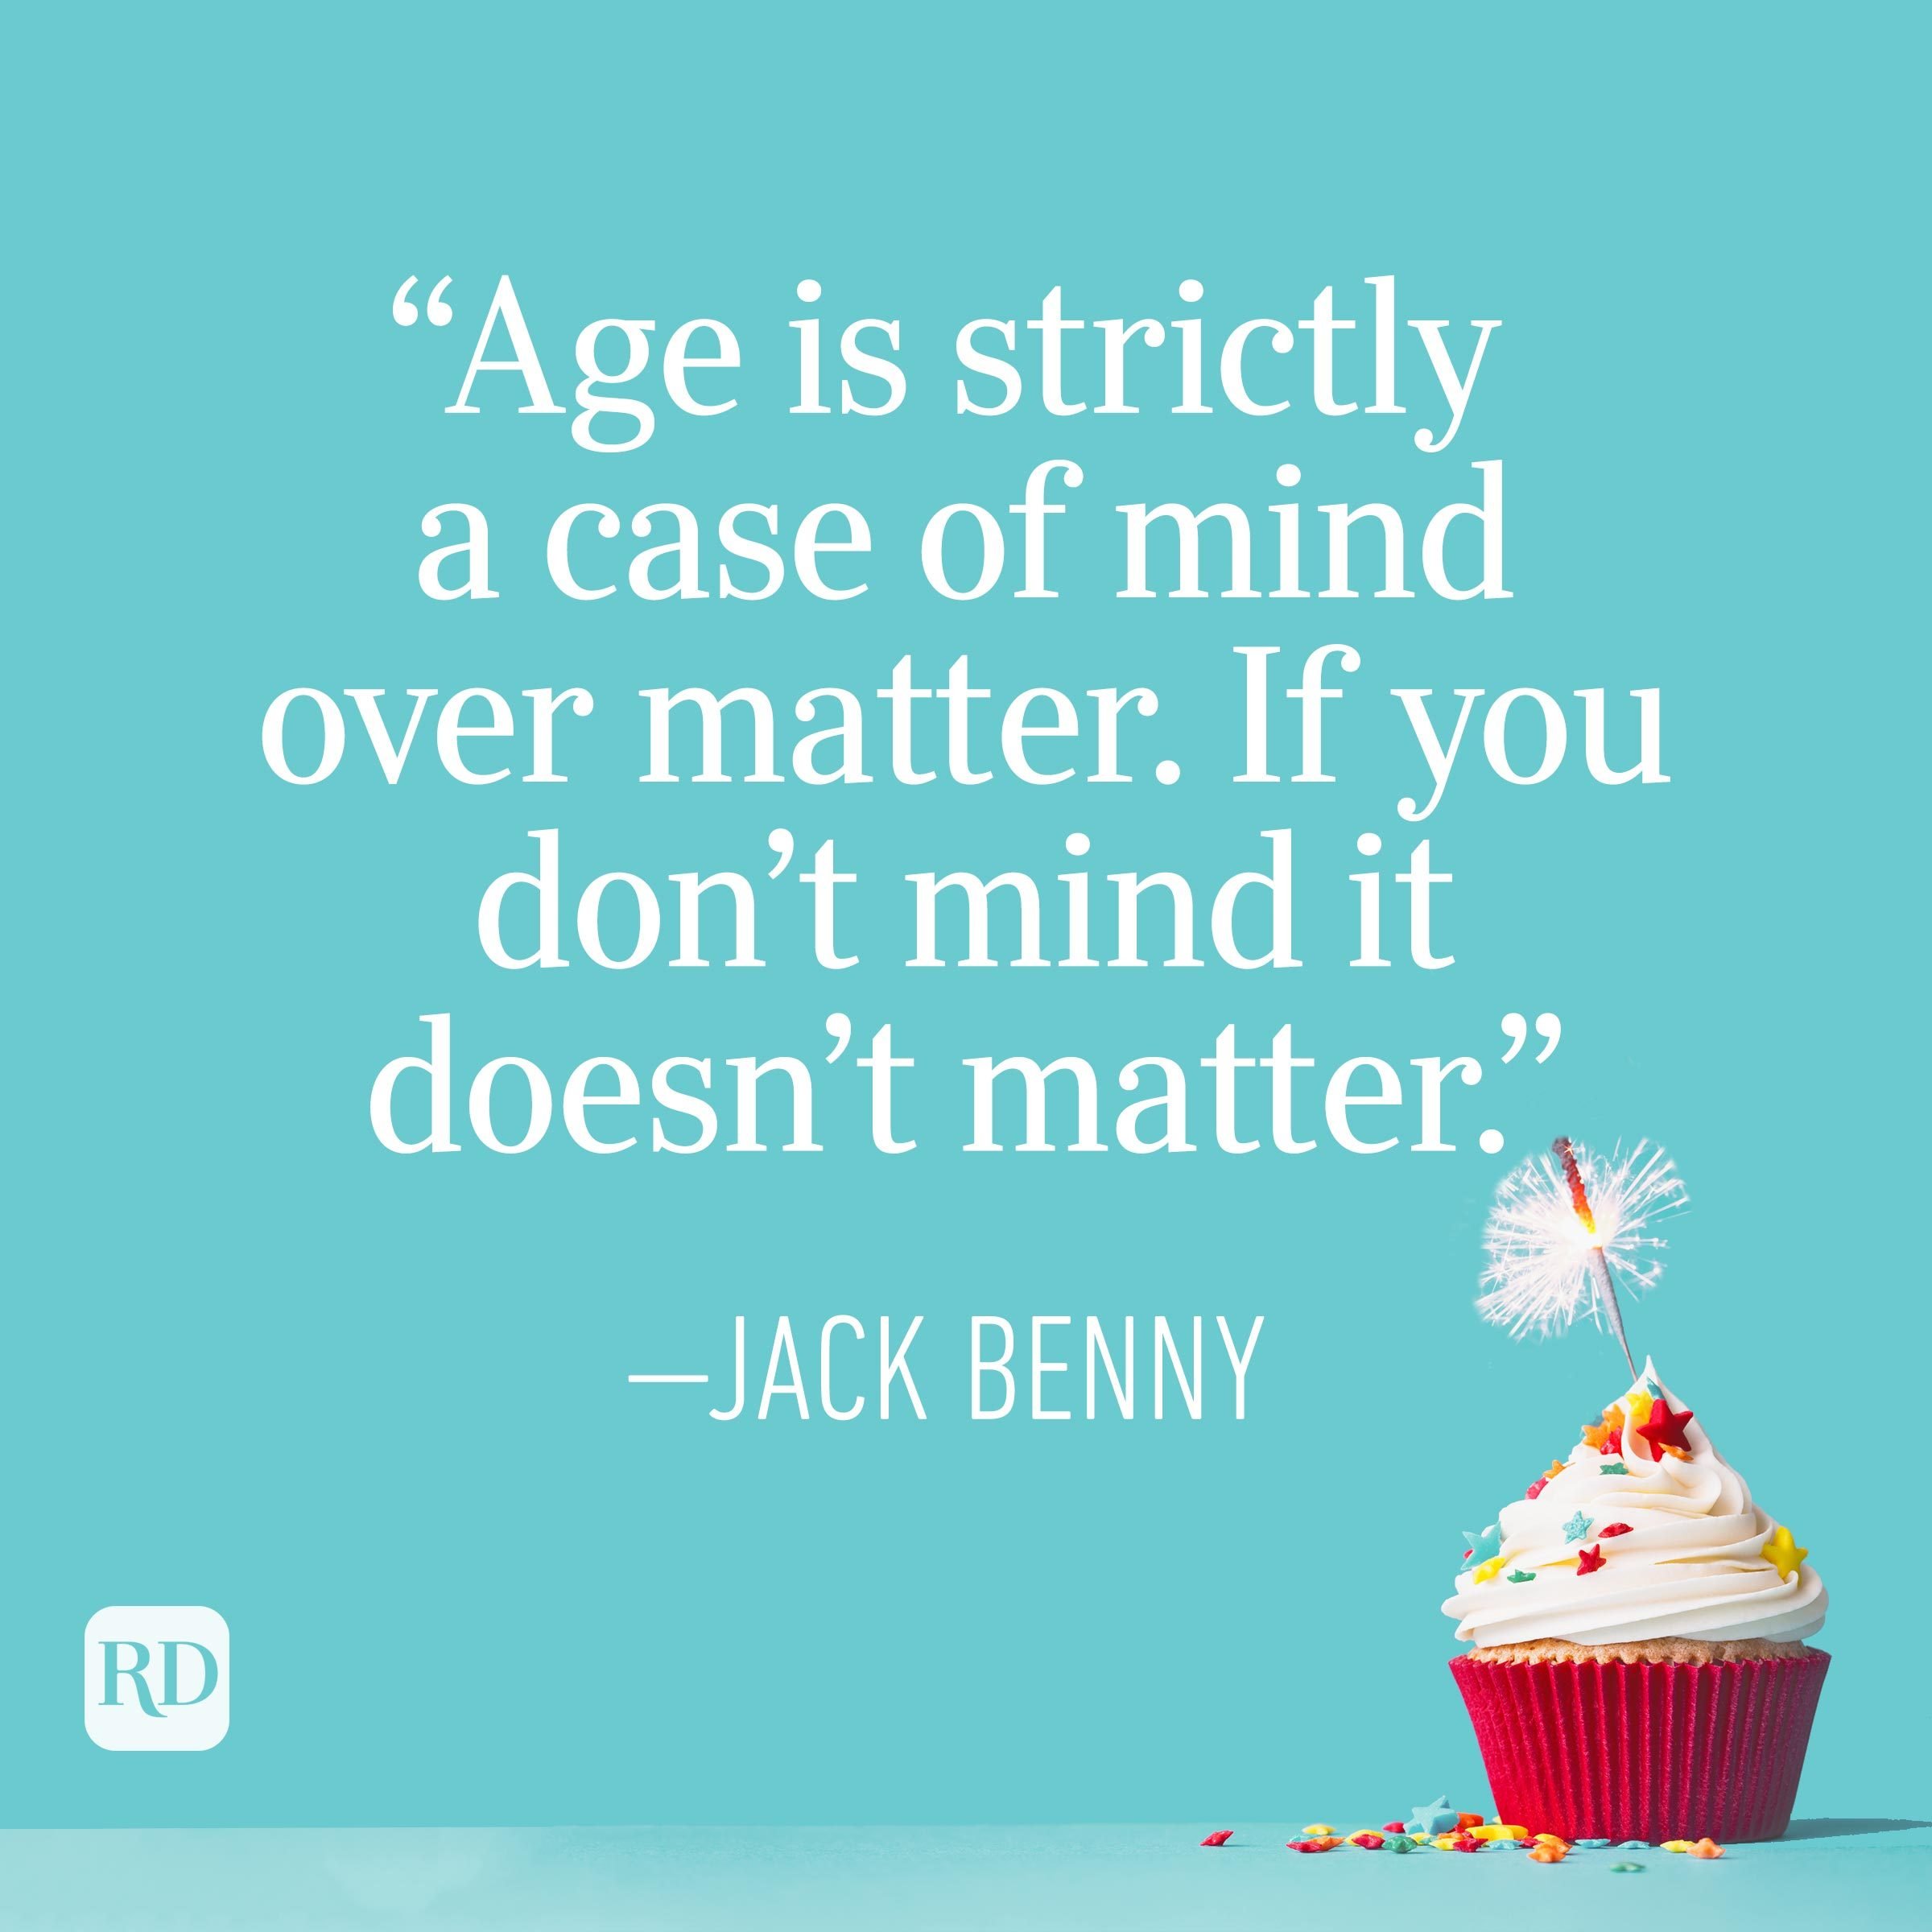 "Age is strictly a case of mind over matter. If you don't mind, it doesn't matter." —Jack Benny